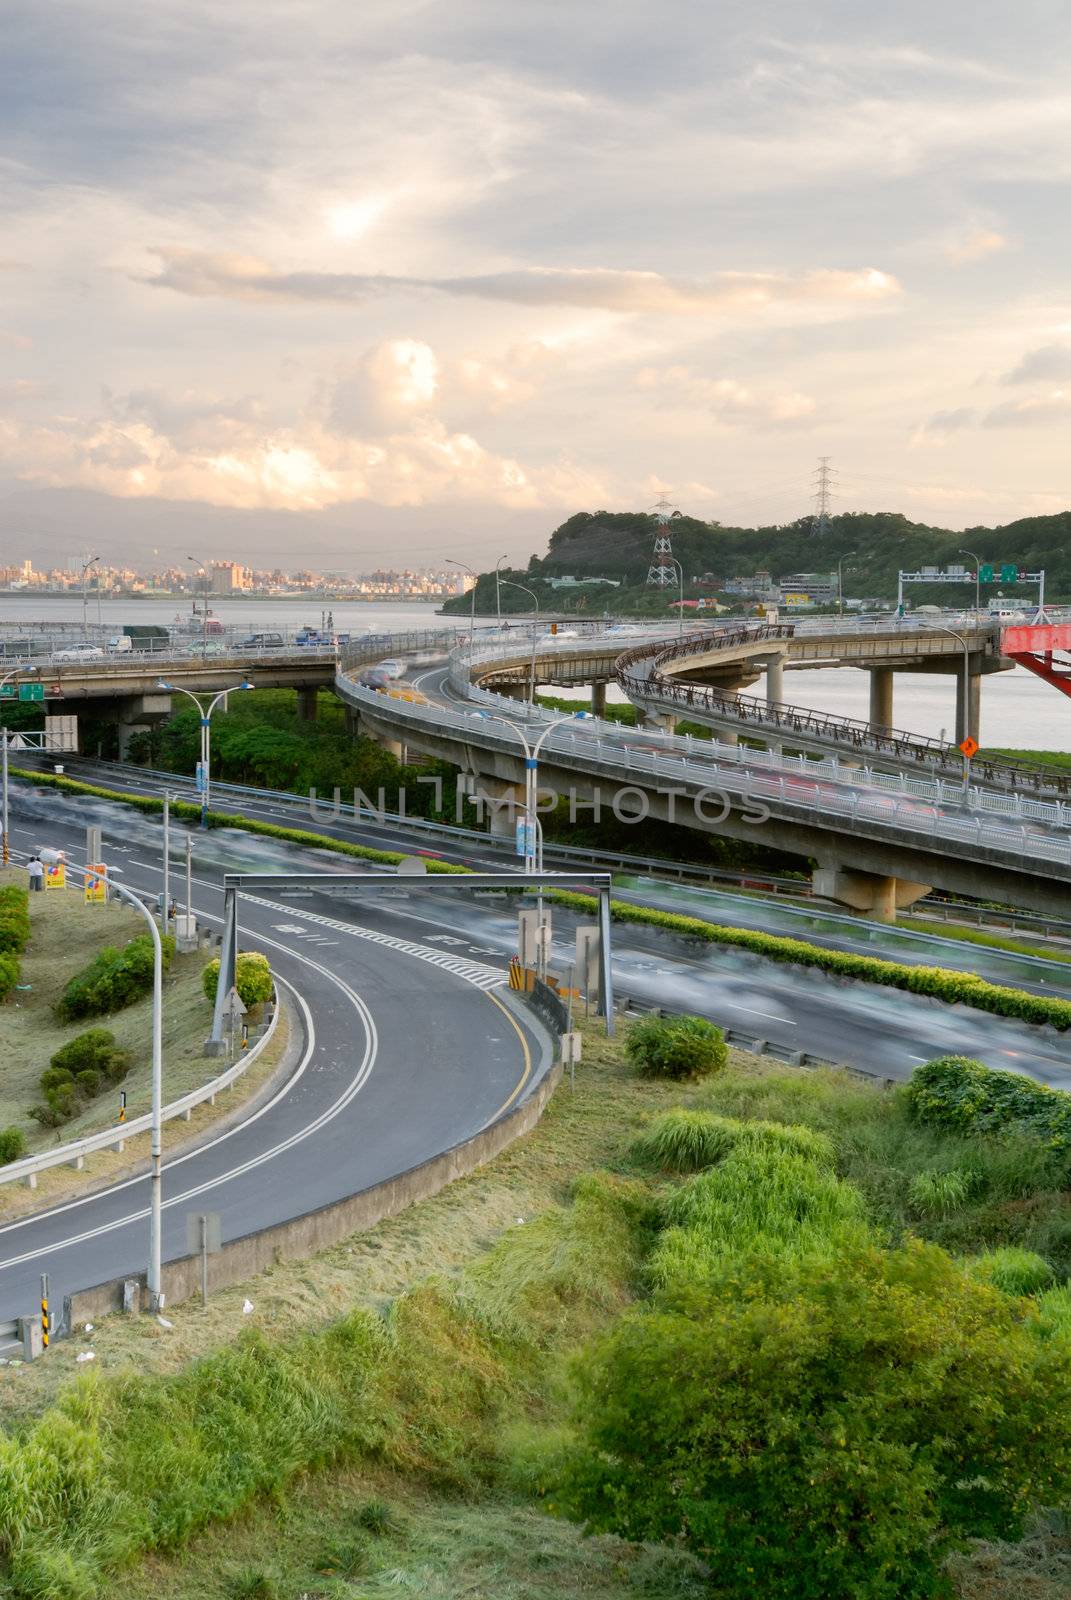 It is a beautiful cityscape of interchange and cars.